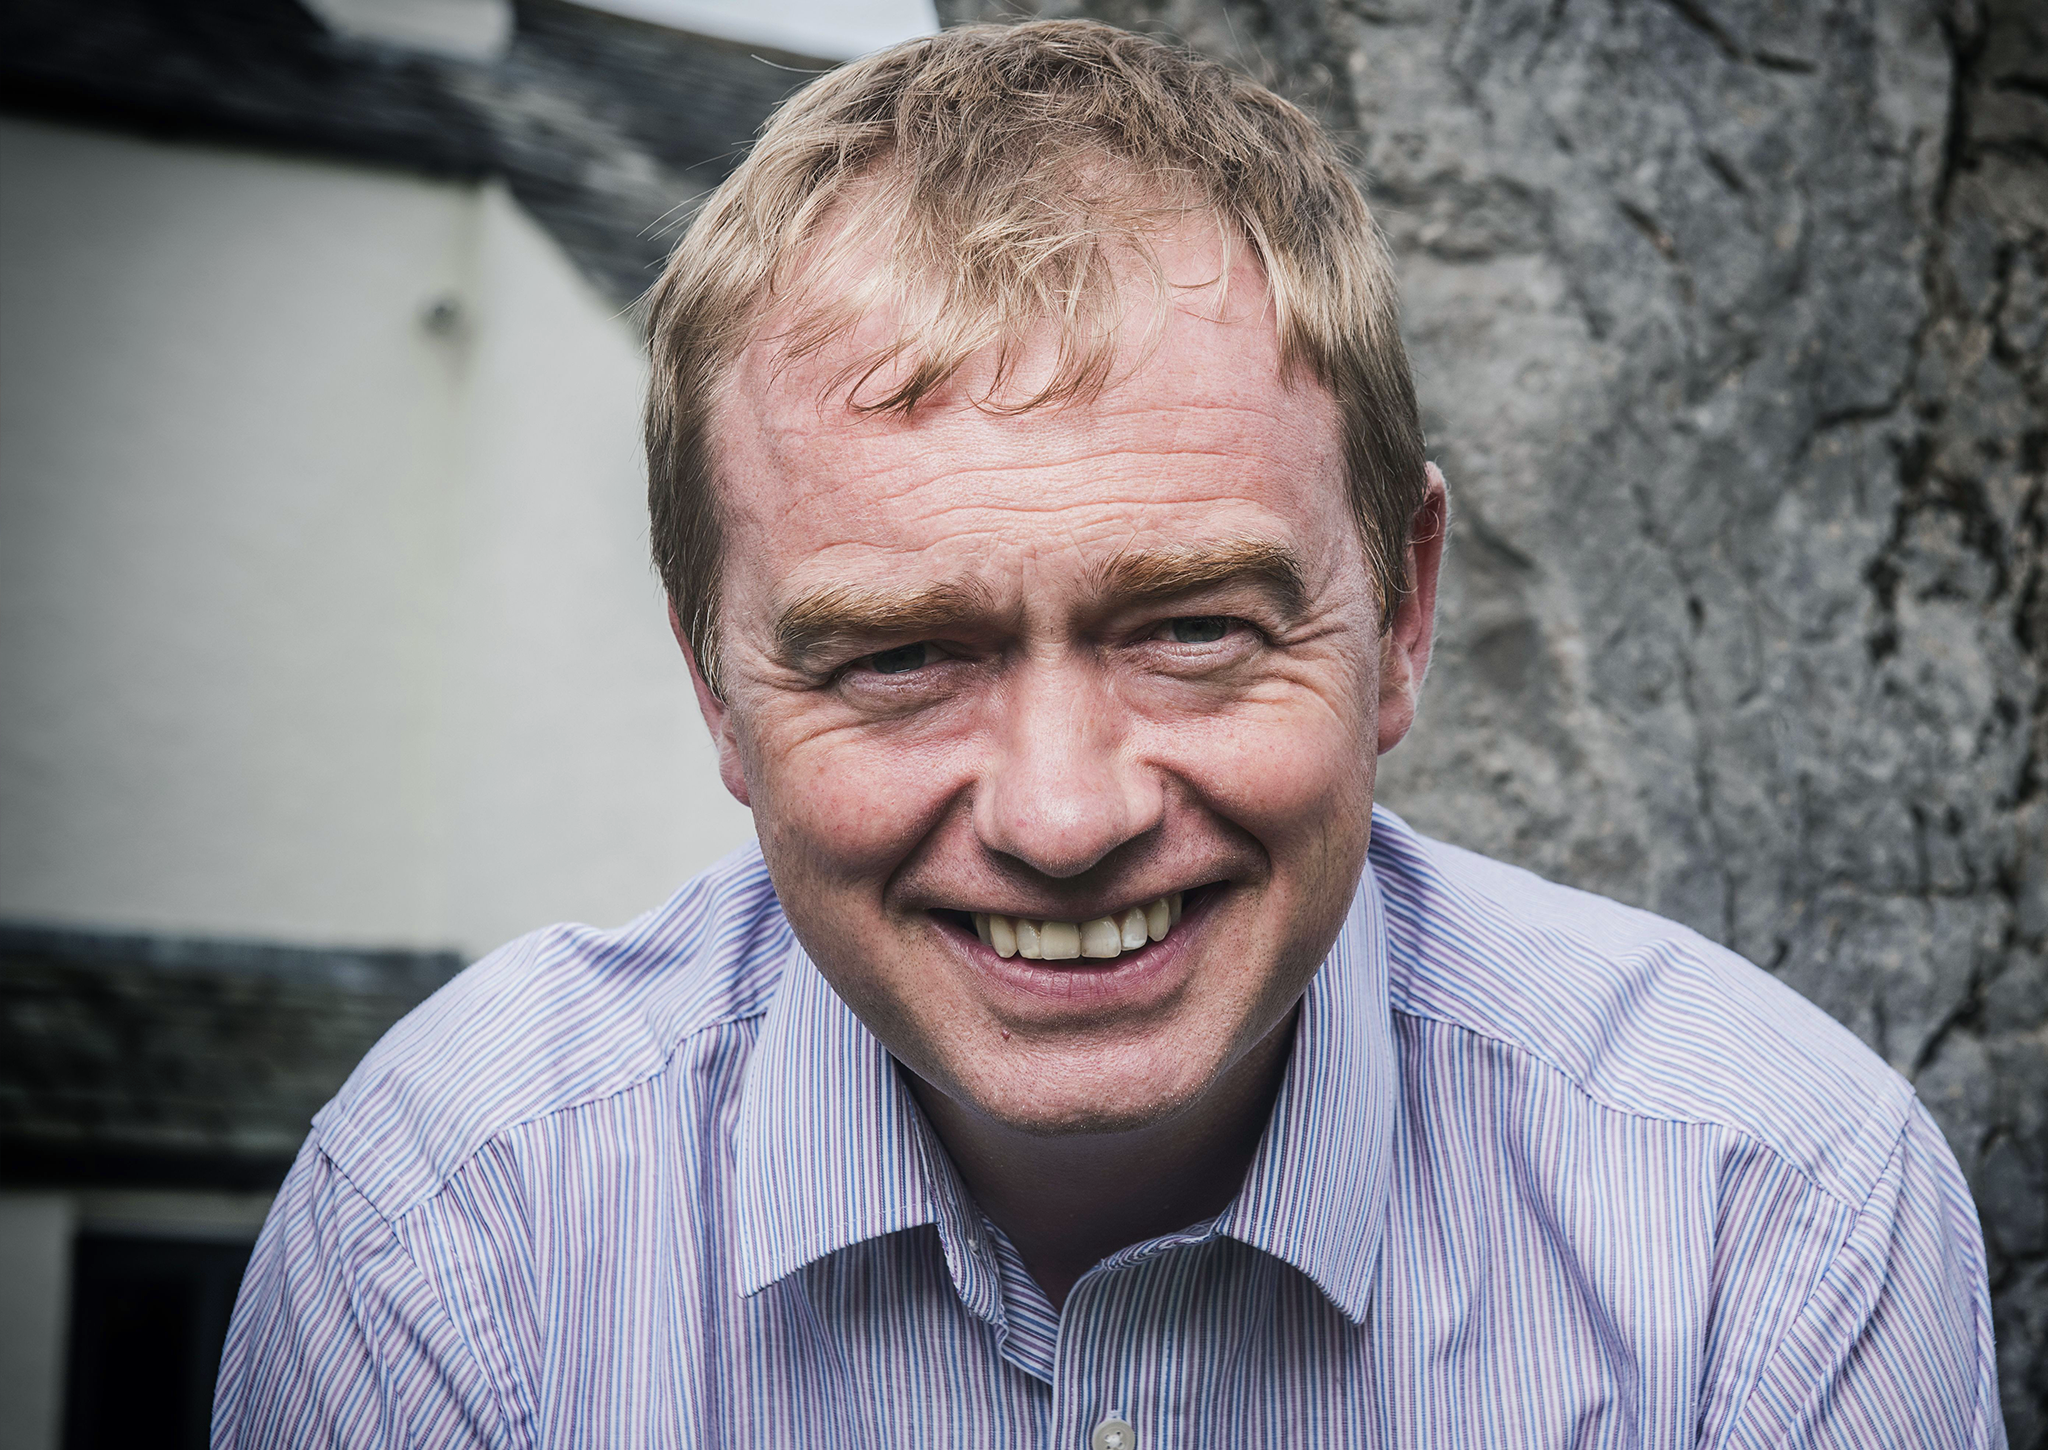 Tim Farron was elected as the MP for Westmorland and Lonsdale with 51 per cent of the vote